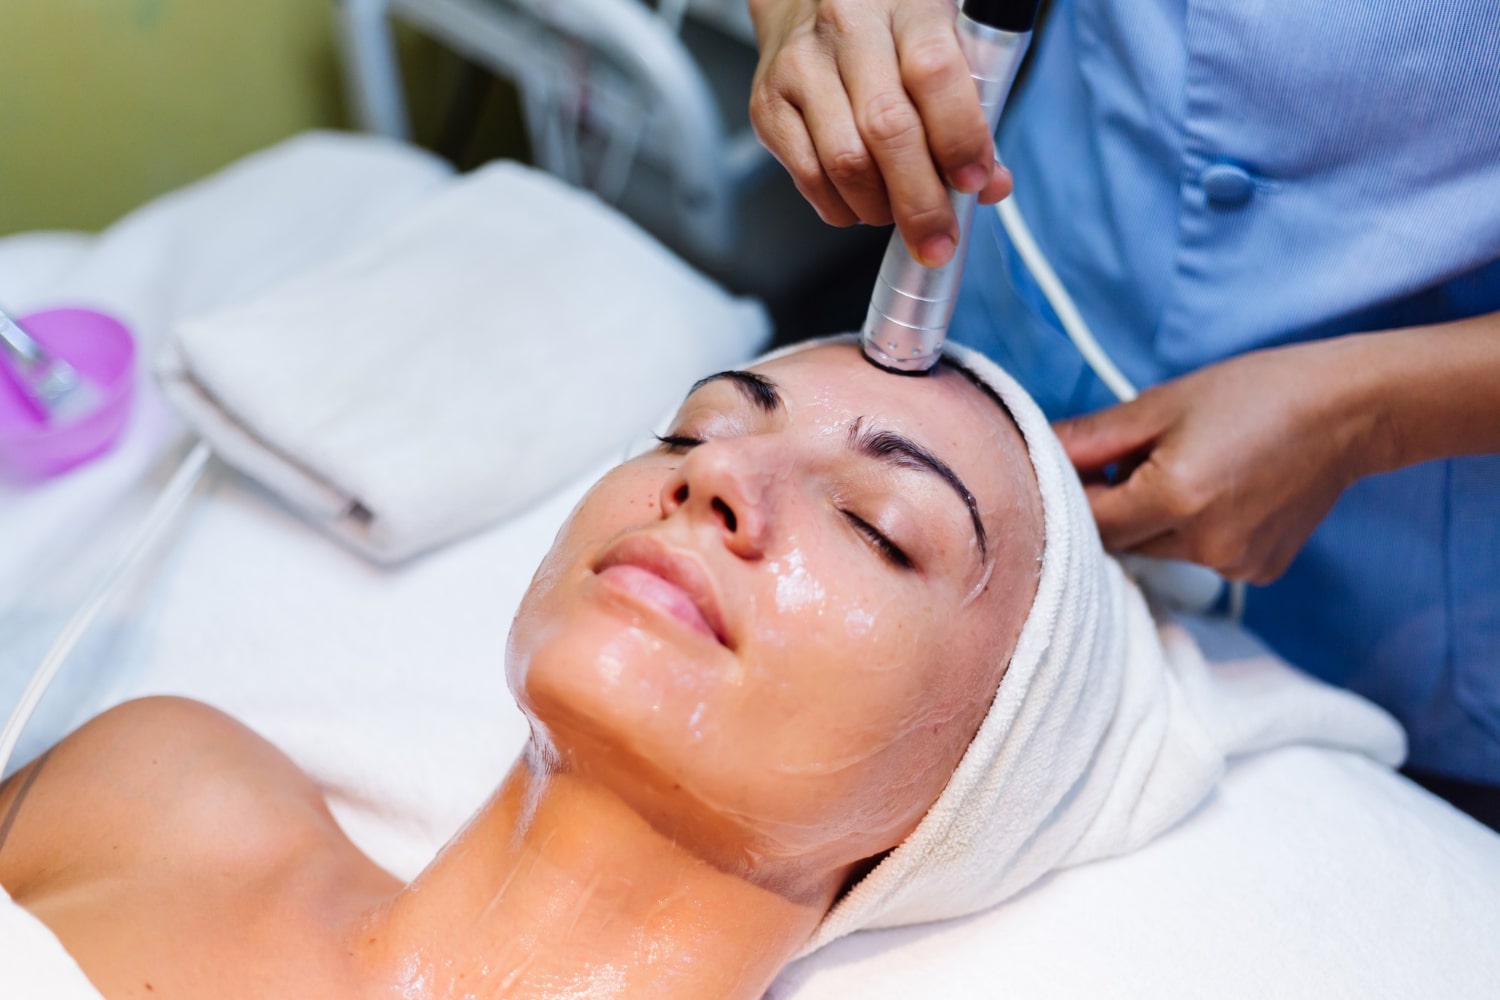 young-woman-lying-cosmetologist-s-table-during-rejuvenation-procedure-min